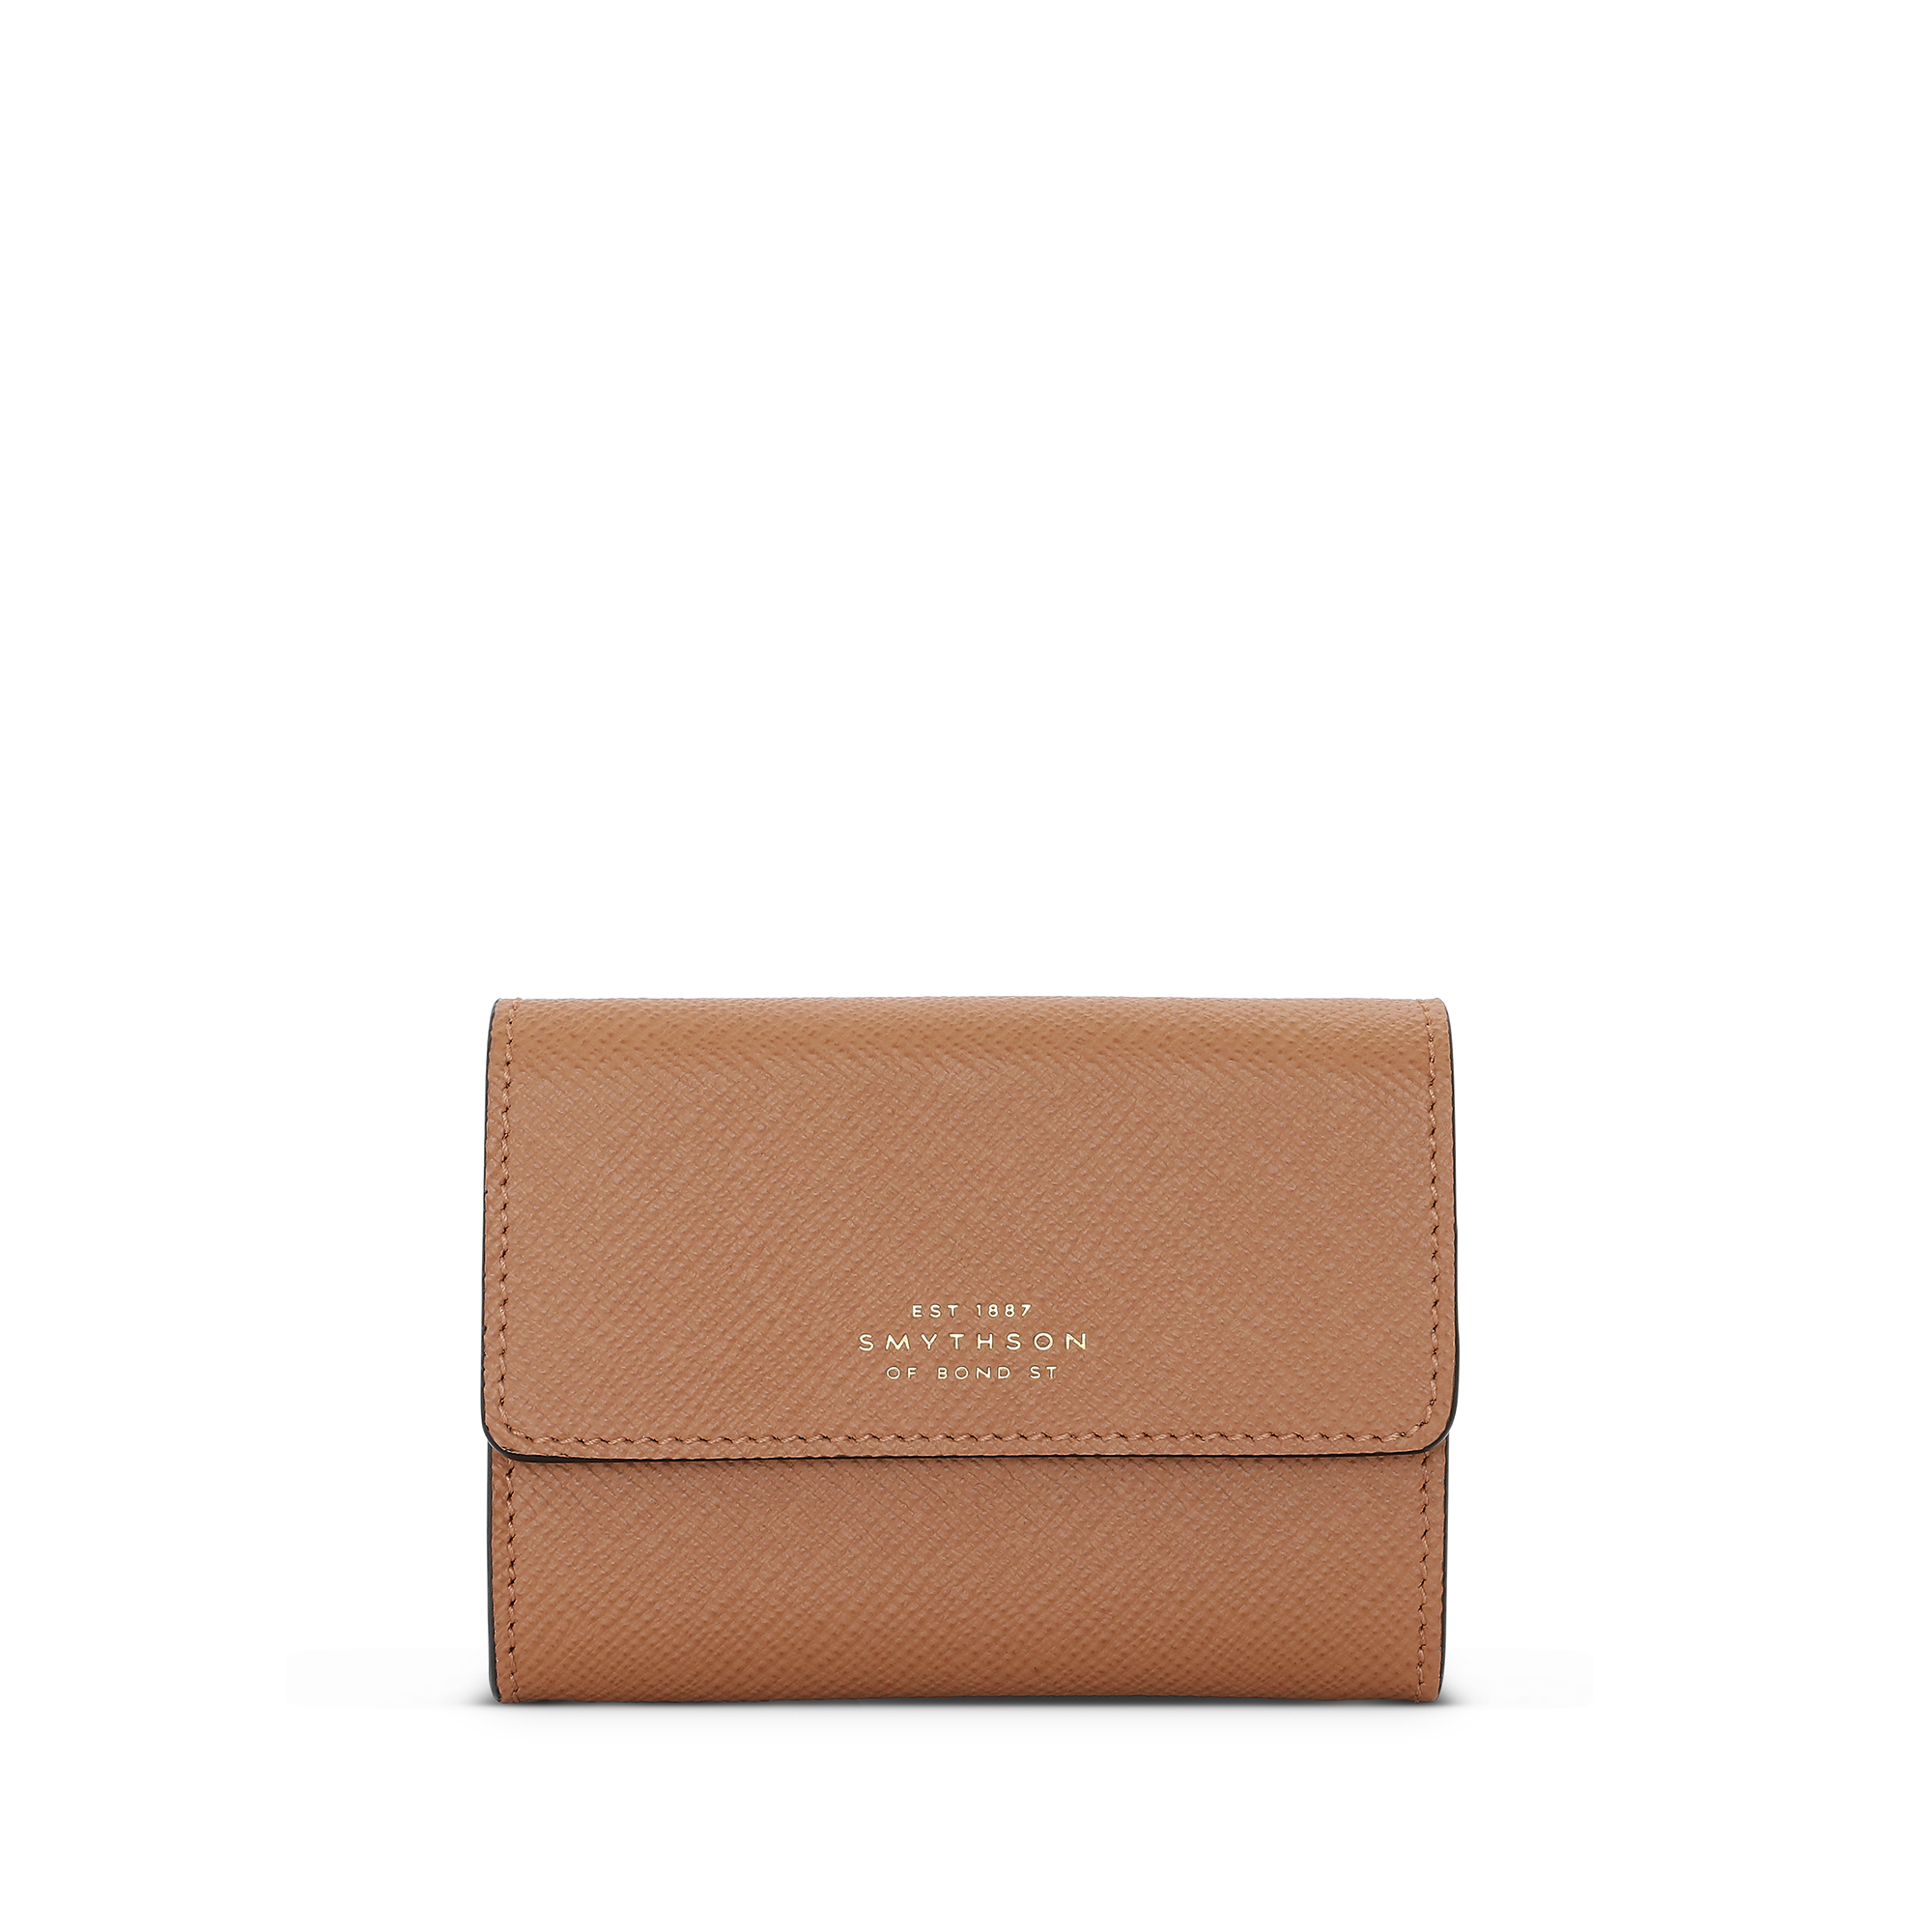 Smythson Small Coin Purse In Panama In Light Rosewood